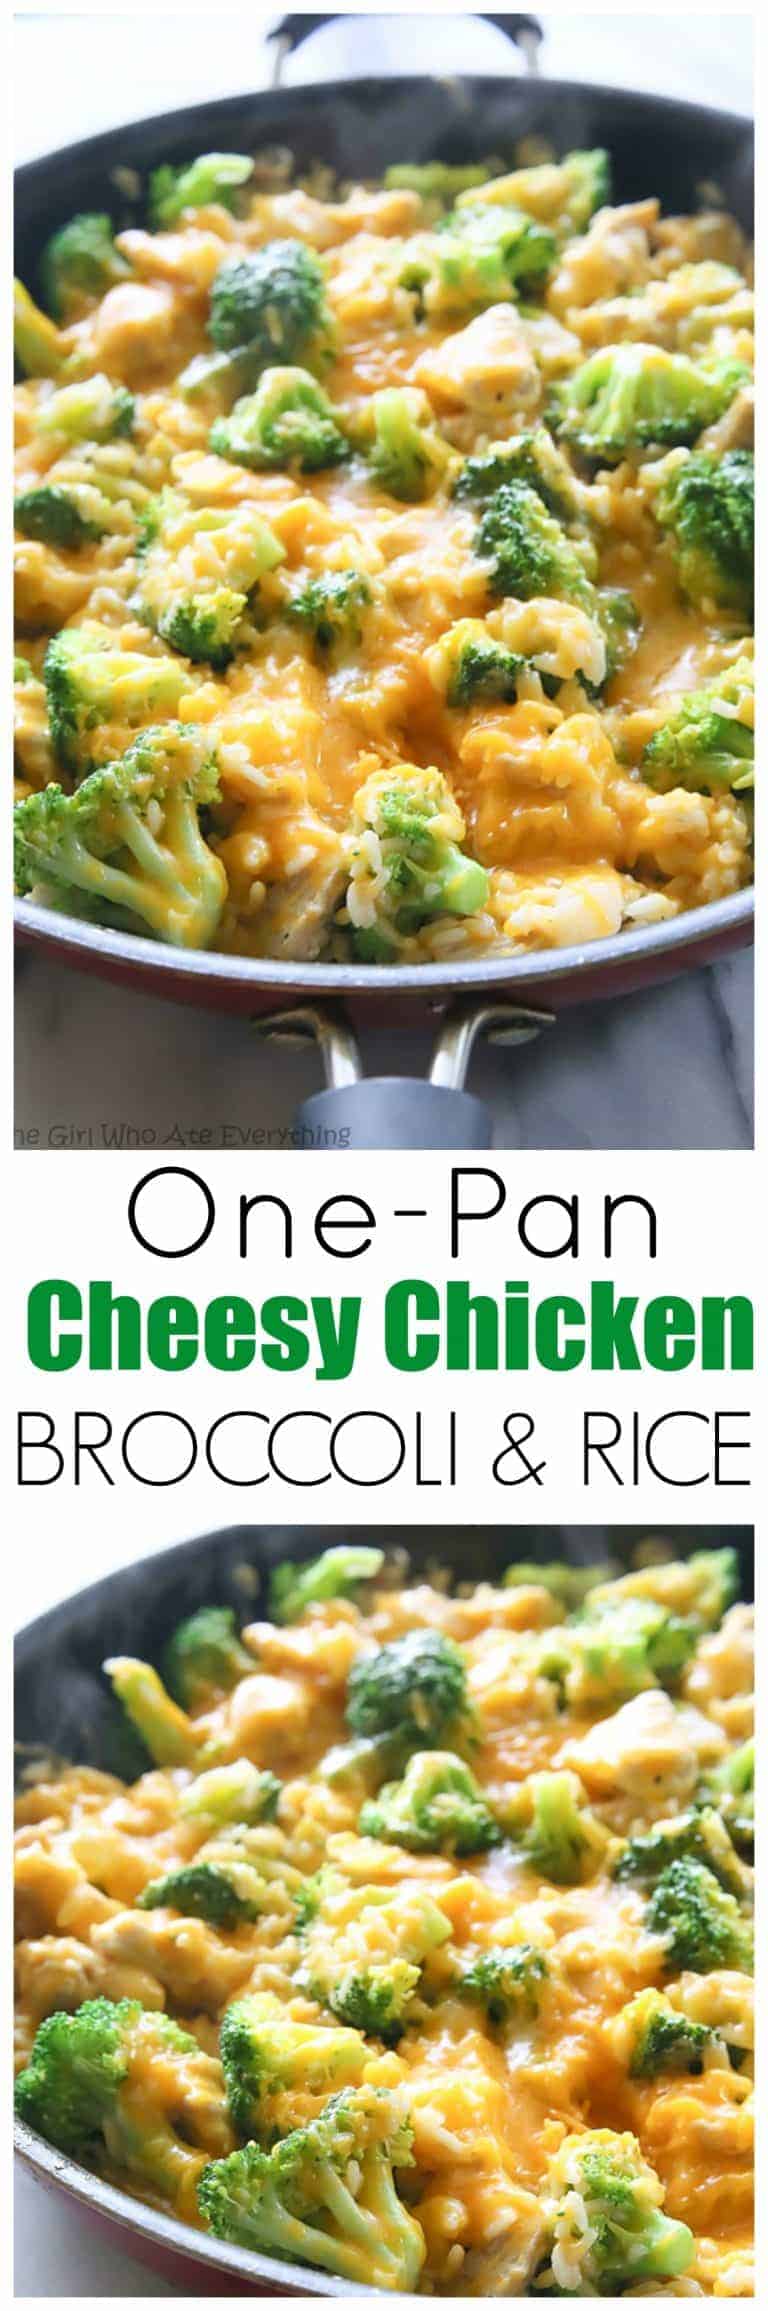 One-Pan Cheesy Chicken, Broccoli, and Rice | The Girl Who Ate Everything